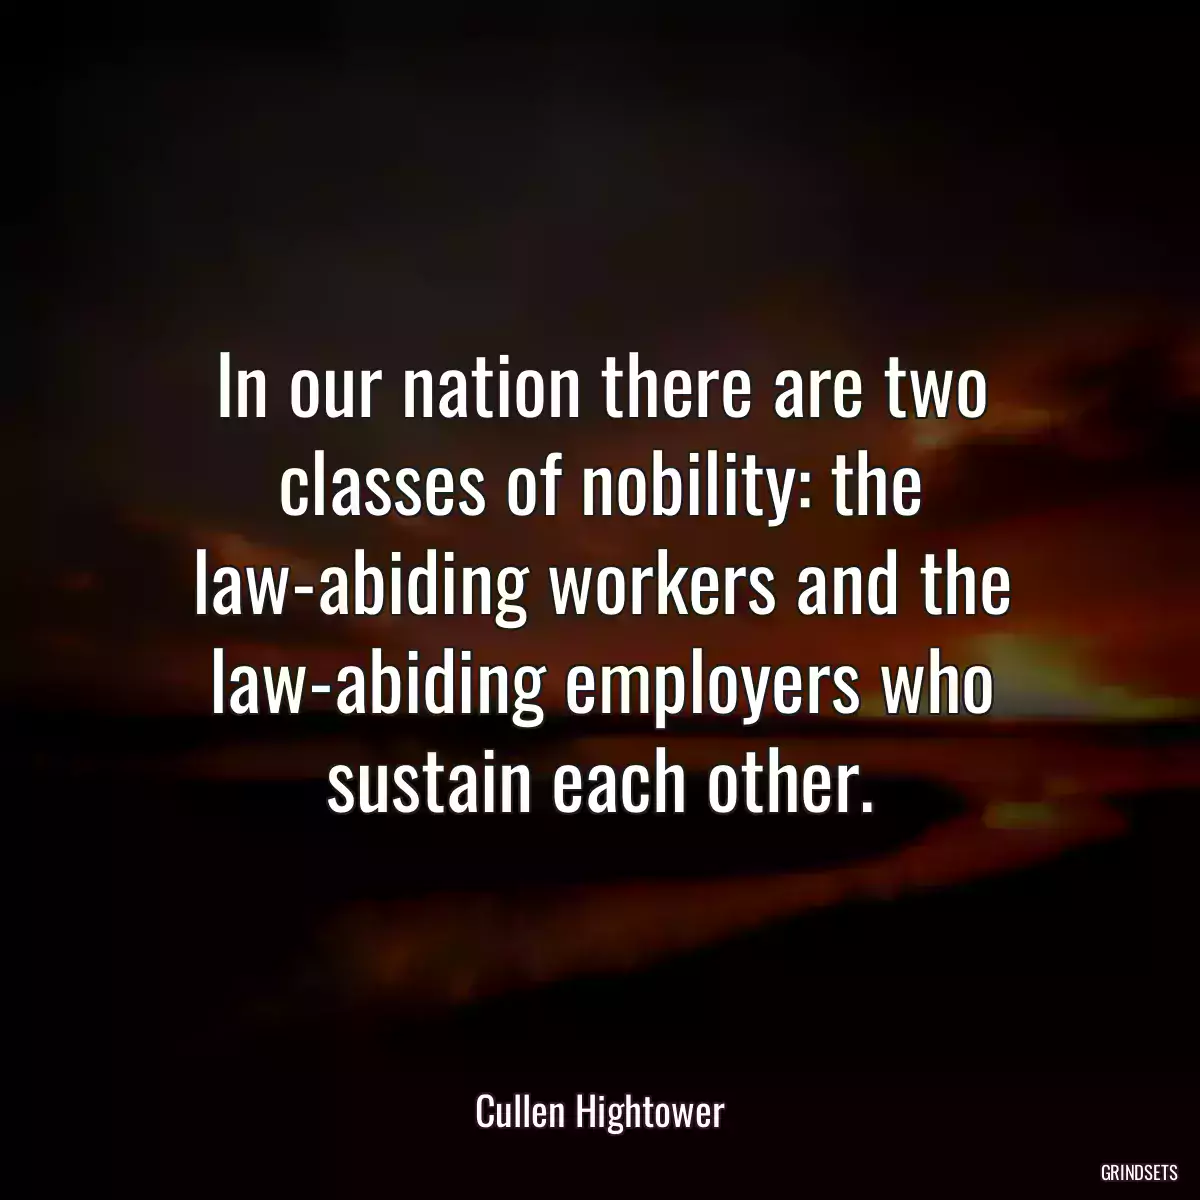 In our nation there are two classes of nobility: the law-abiding workers and the law-abiding employers who sustain each other.